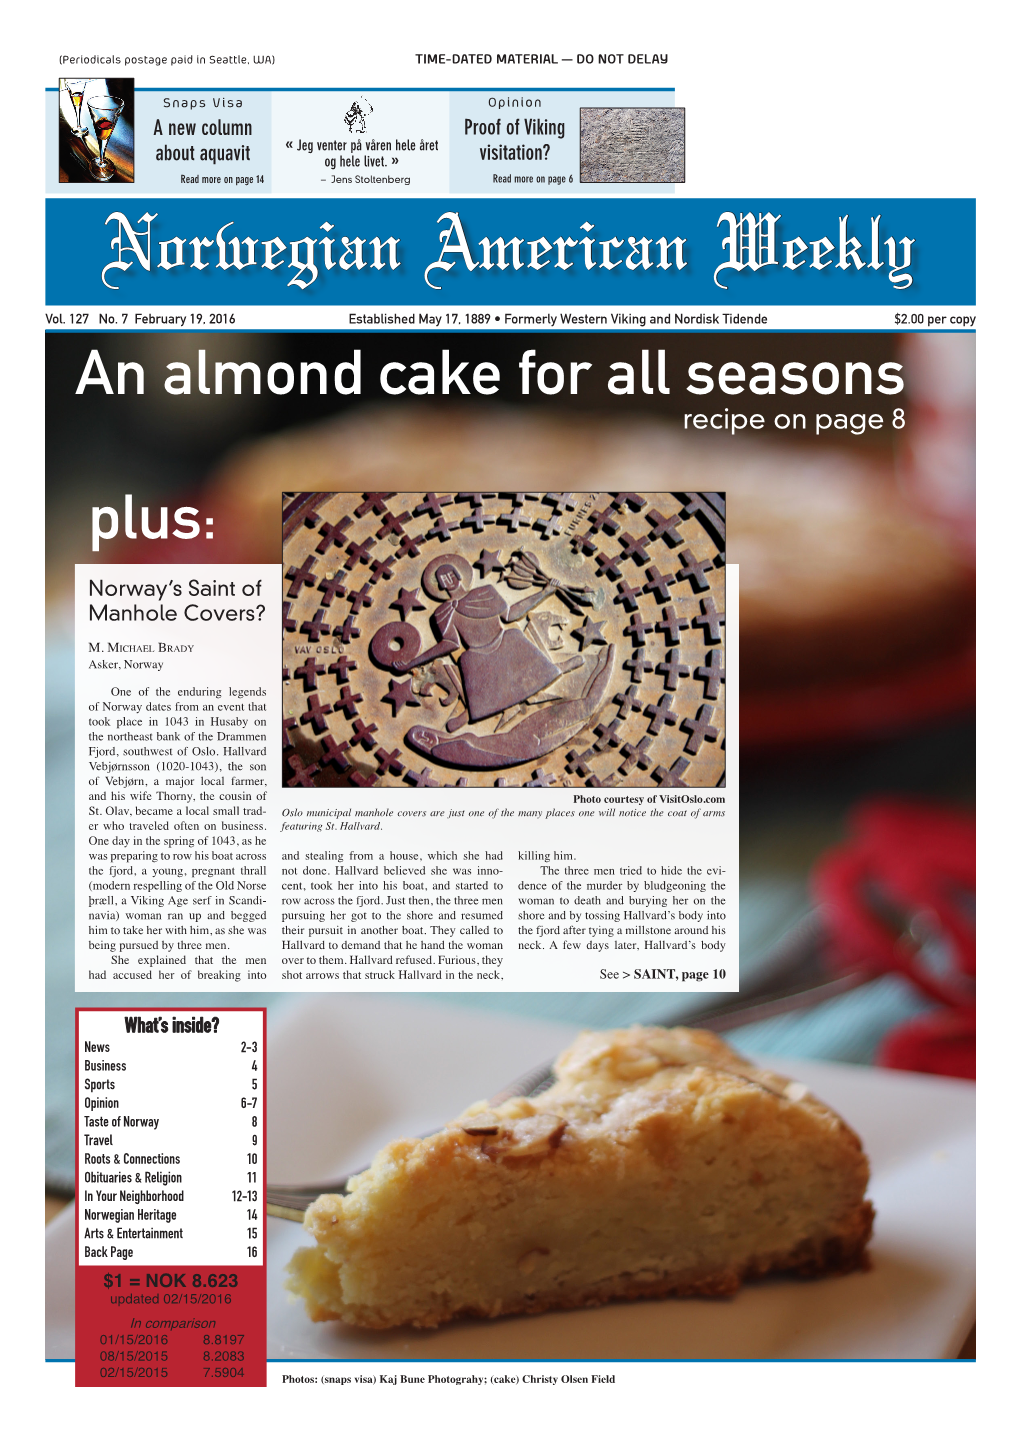 An Almond Cake for All Seasons Plus